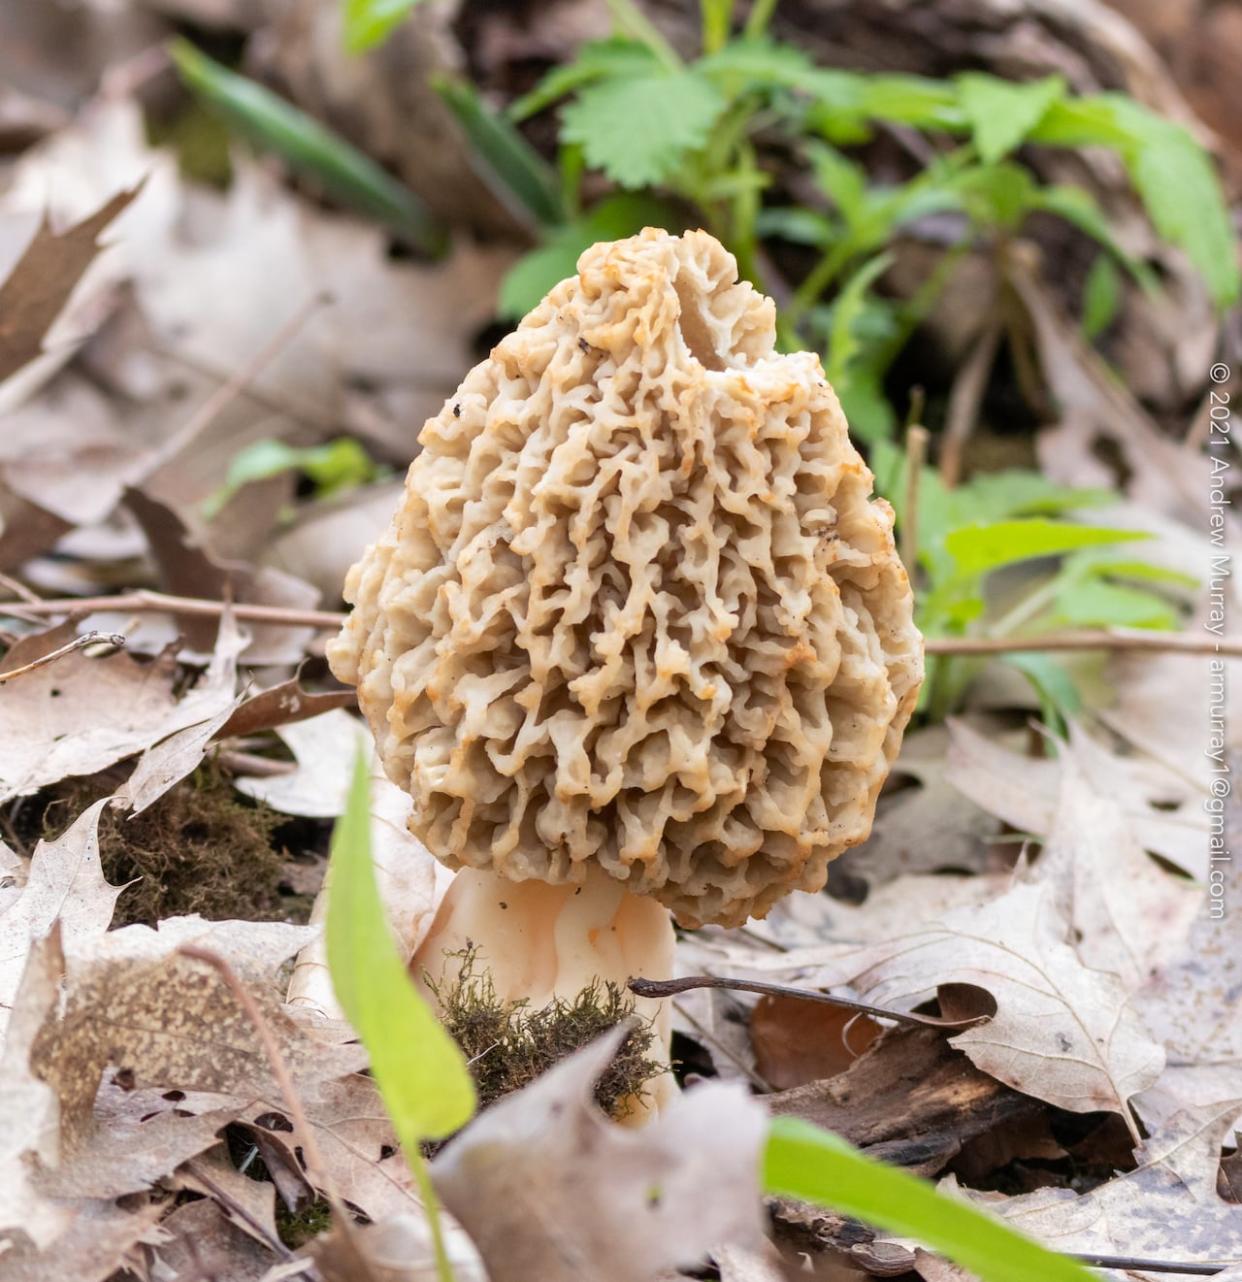 A lone morel mushroom sprouts through the leaf litter in London, Ont. With a strong and distinct flavour, they're prized for their ability to bring new life to food dishes, but it's important to know the difference between 'true' and 'false' morels.   (Andrew Murray/iNaturalist - image credit)